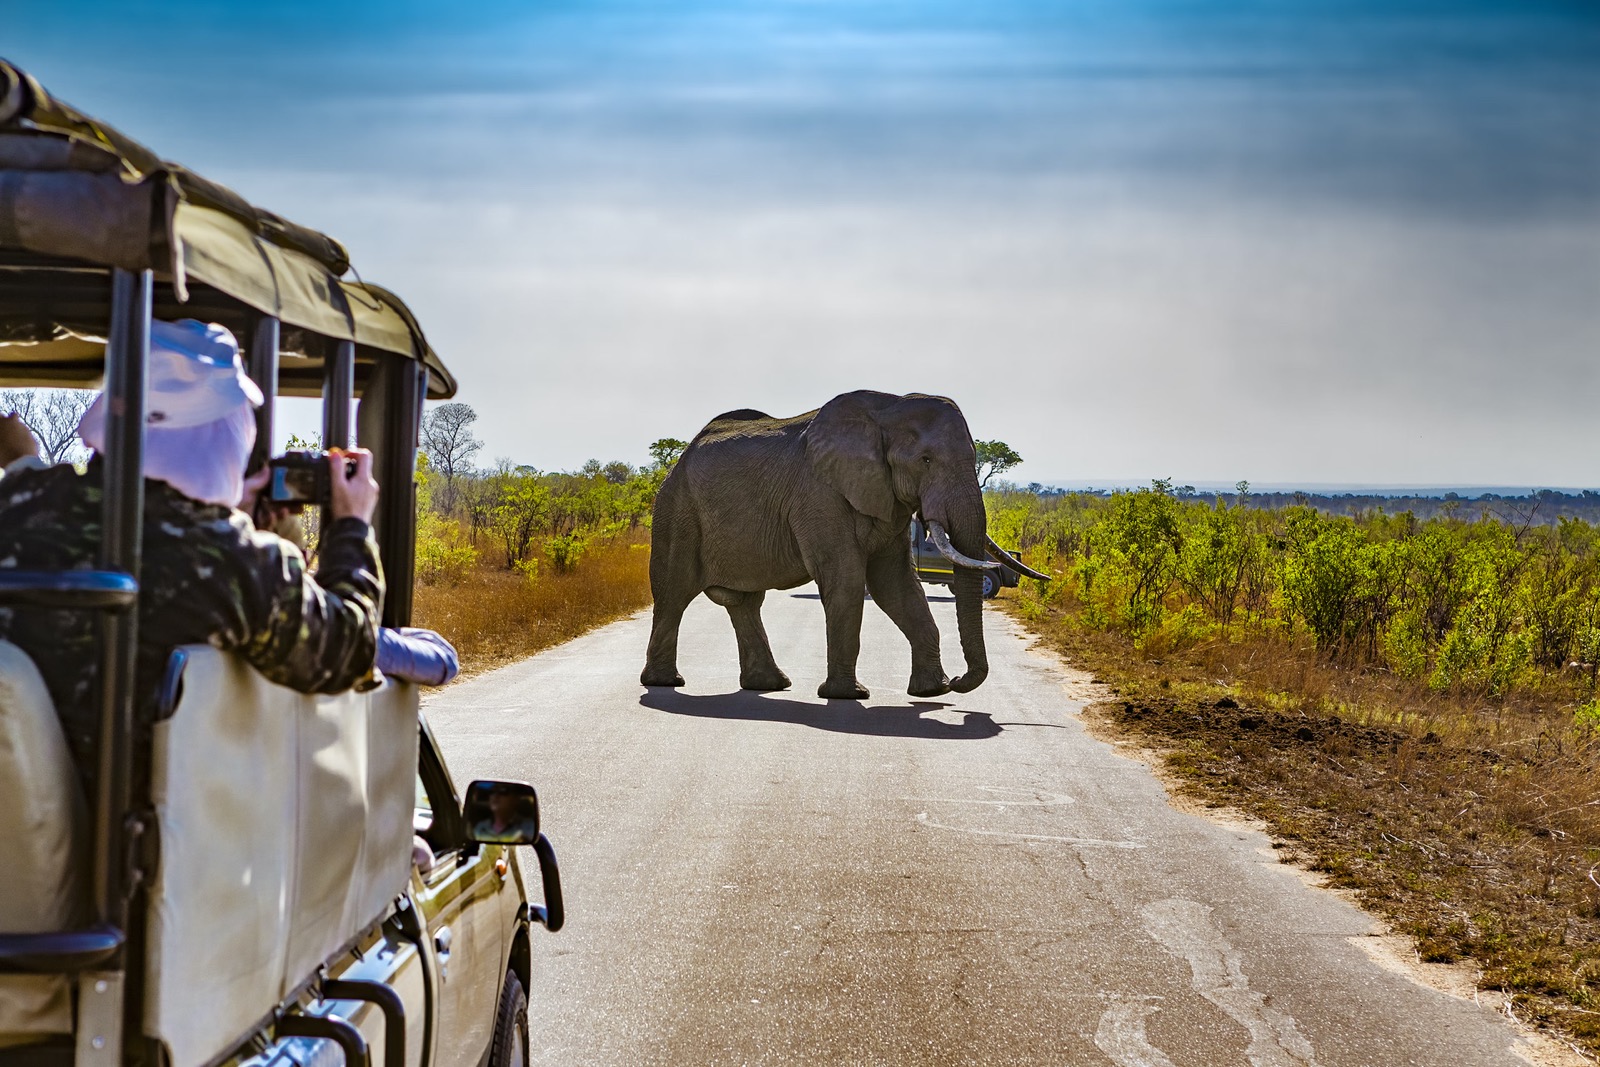 Create a Travel Bucket List ✈️ to Determine What Fantasy World You Are Most Suited for Kruger National Park, South Africa